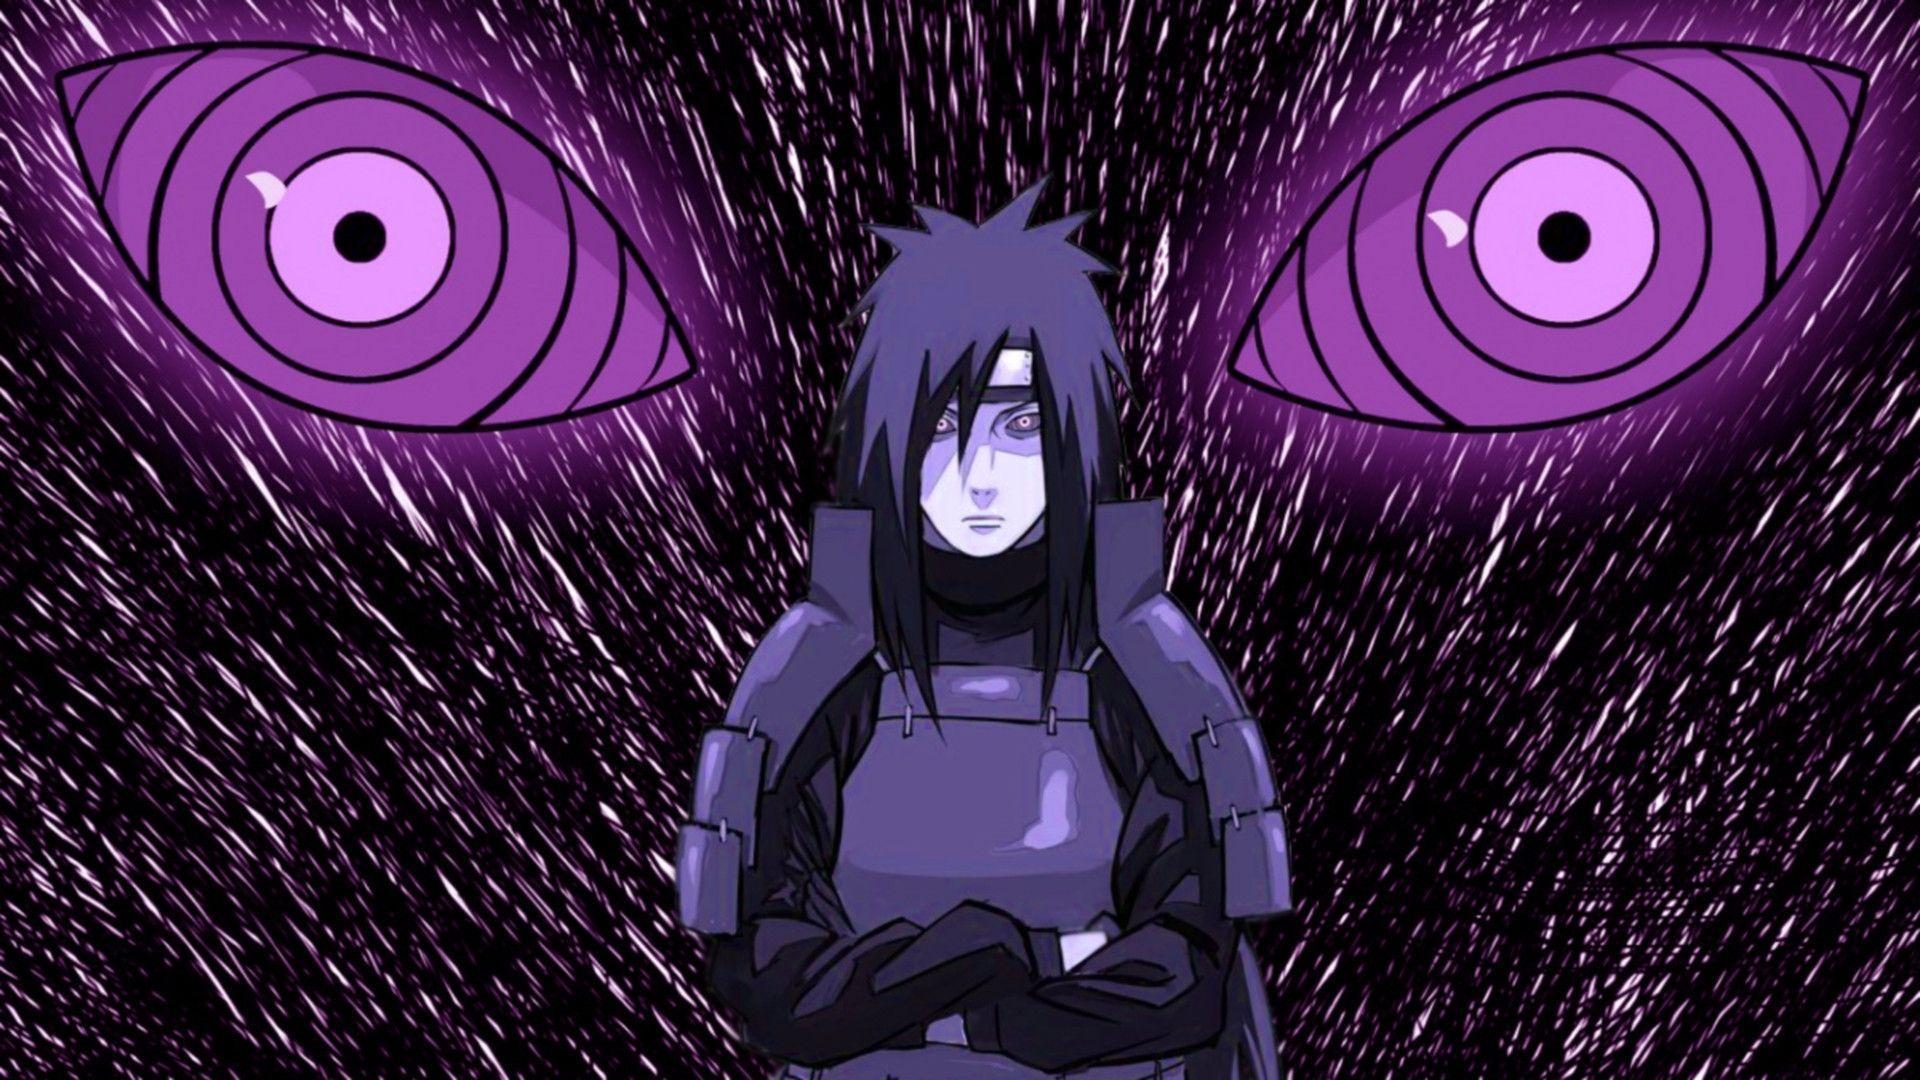 Free download Madara Uchiha Rinnegan Image amp Picture Becuo [1920x1080] for your Desktop, Mobile & Tablet. Explore Uchiha Madara Wallpaper. Uchiha Wallpaper, Uchiha Clan Wallpaper, Sasuke Uchiha Wallpaper HD